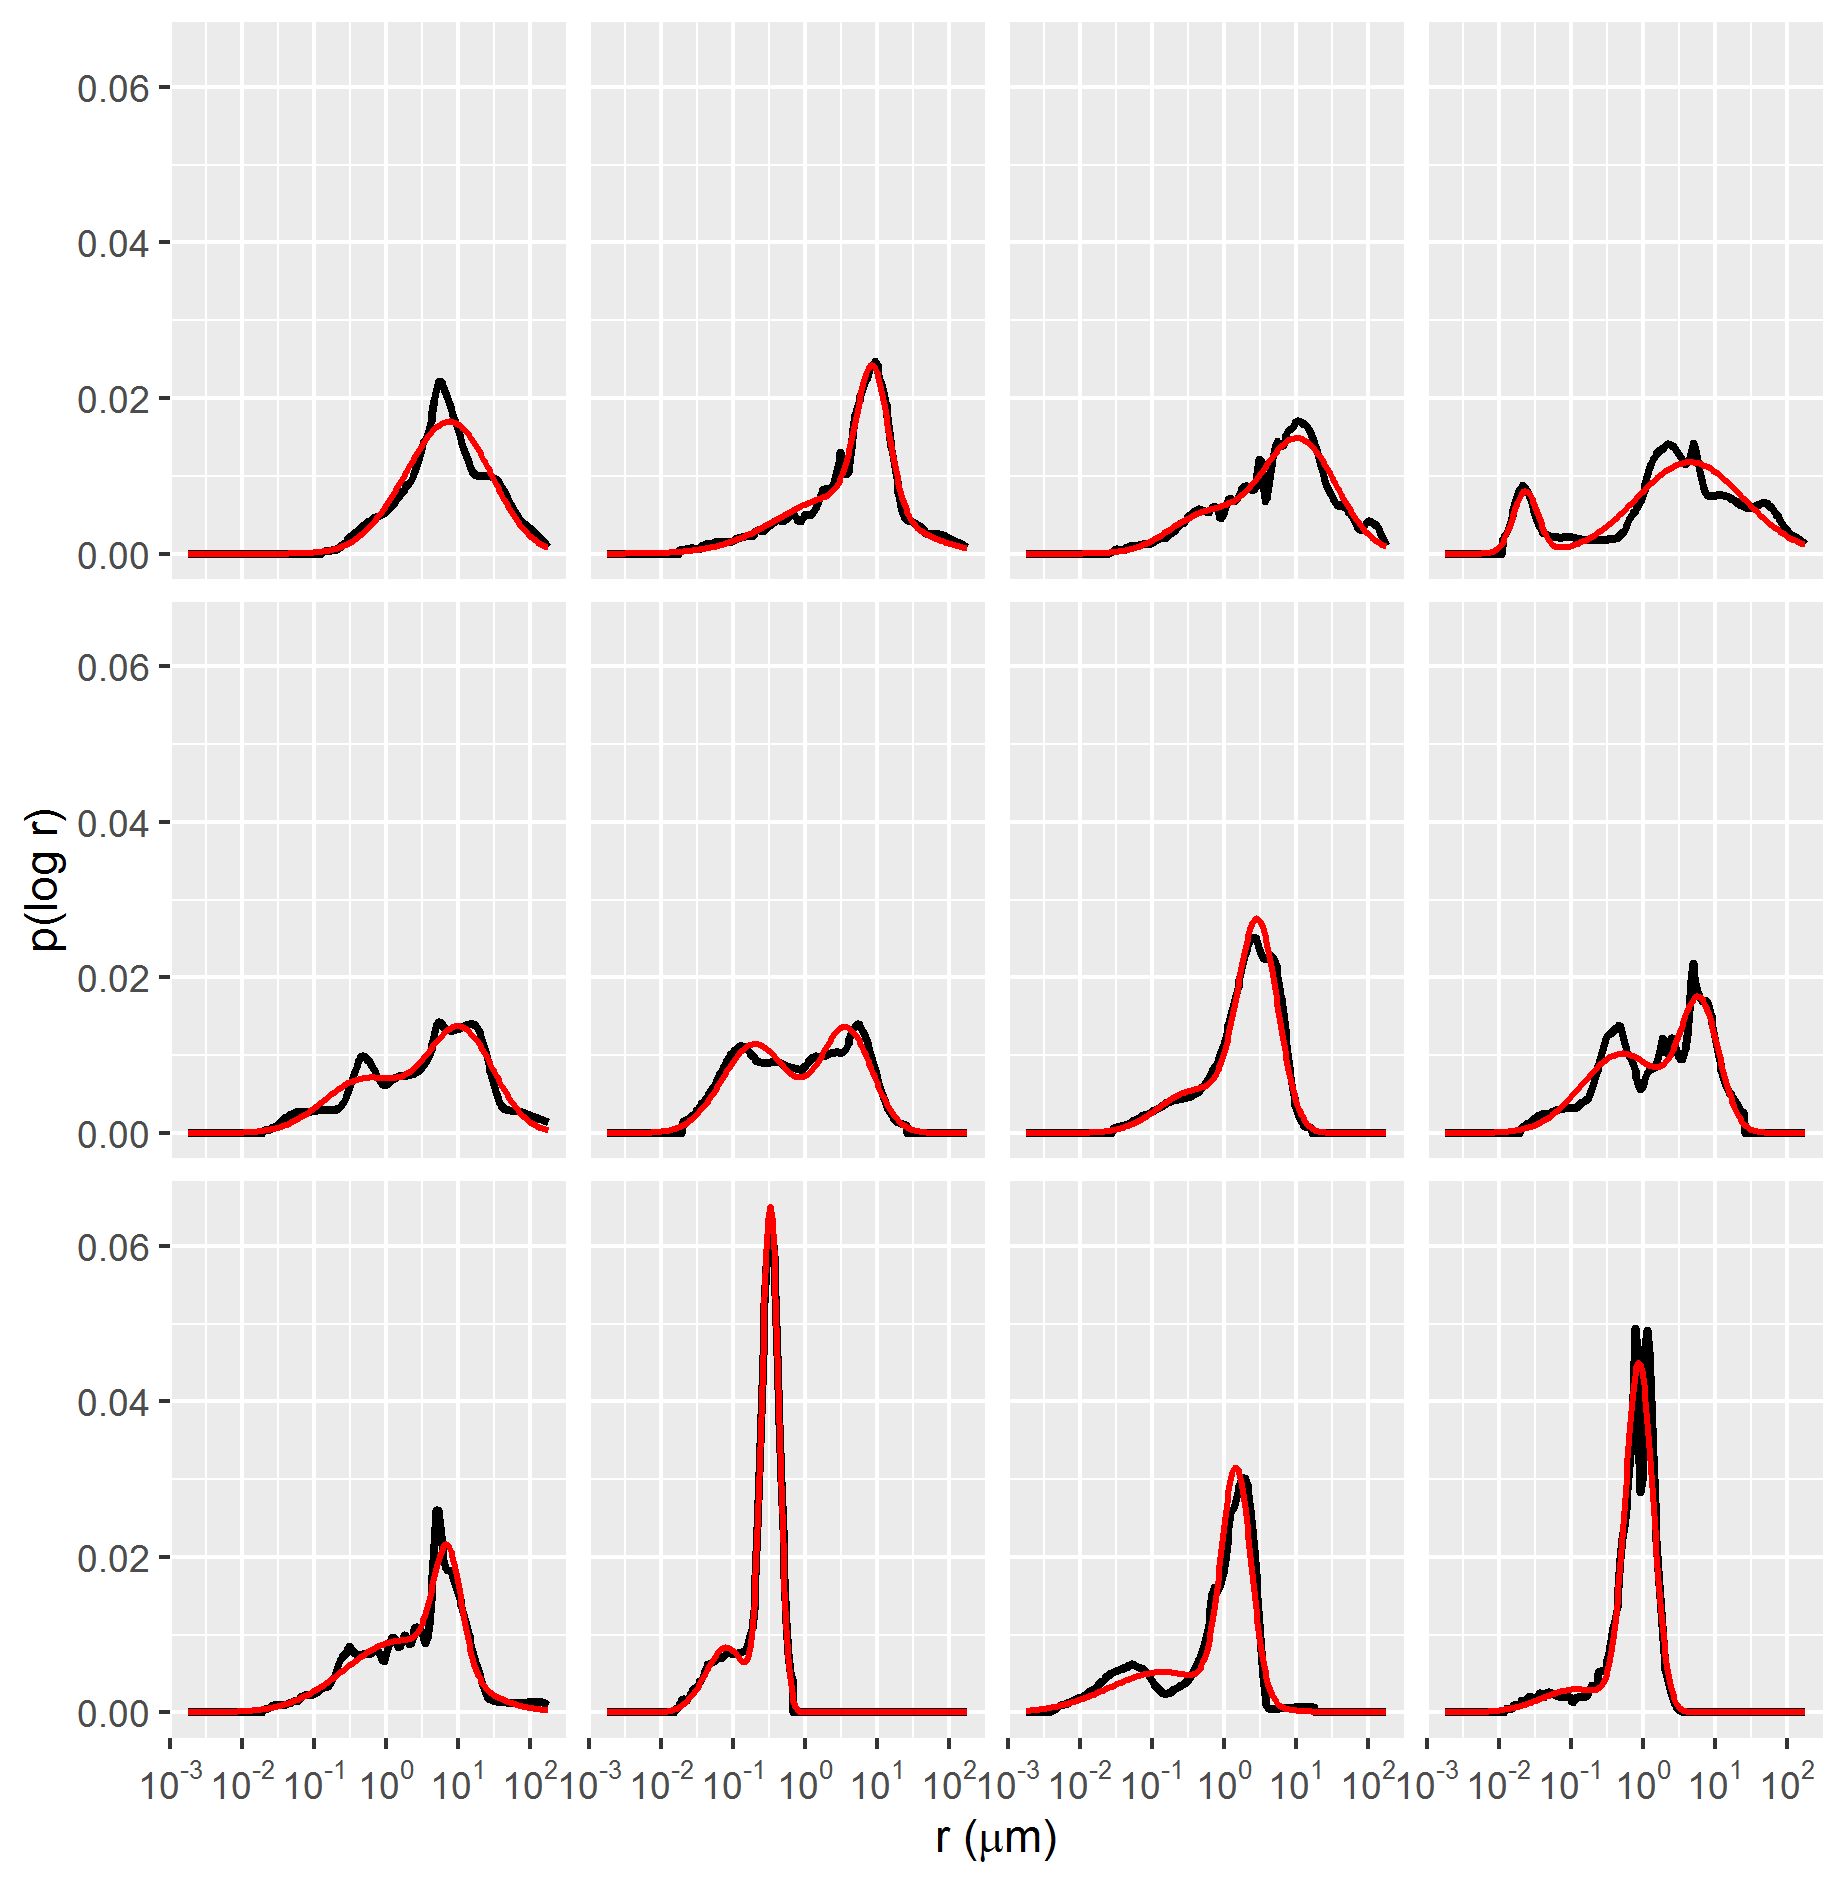 Gaussian mixture (red lines) fitted to p(log r) distributions of MICP data samples (black lines).